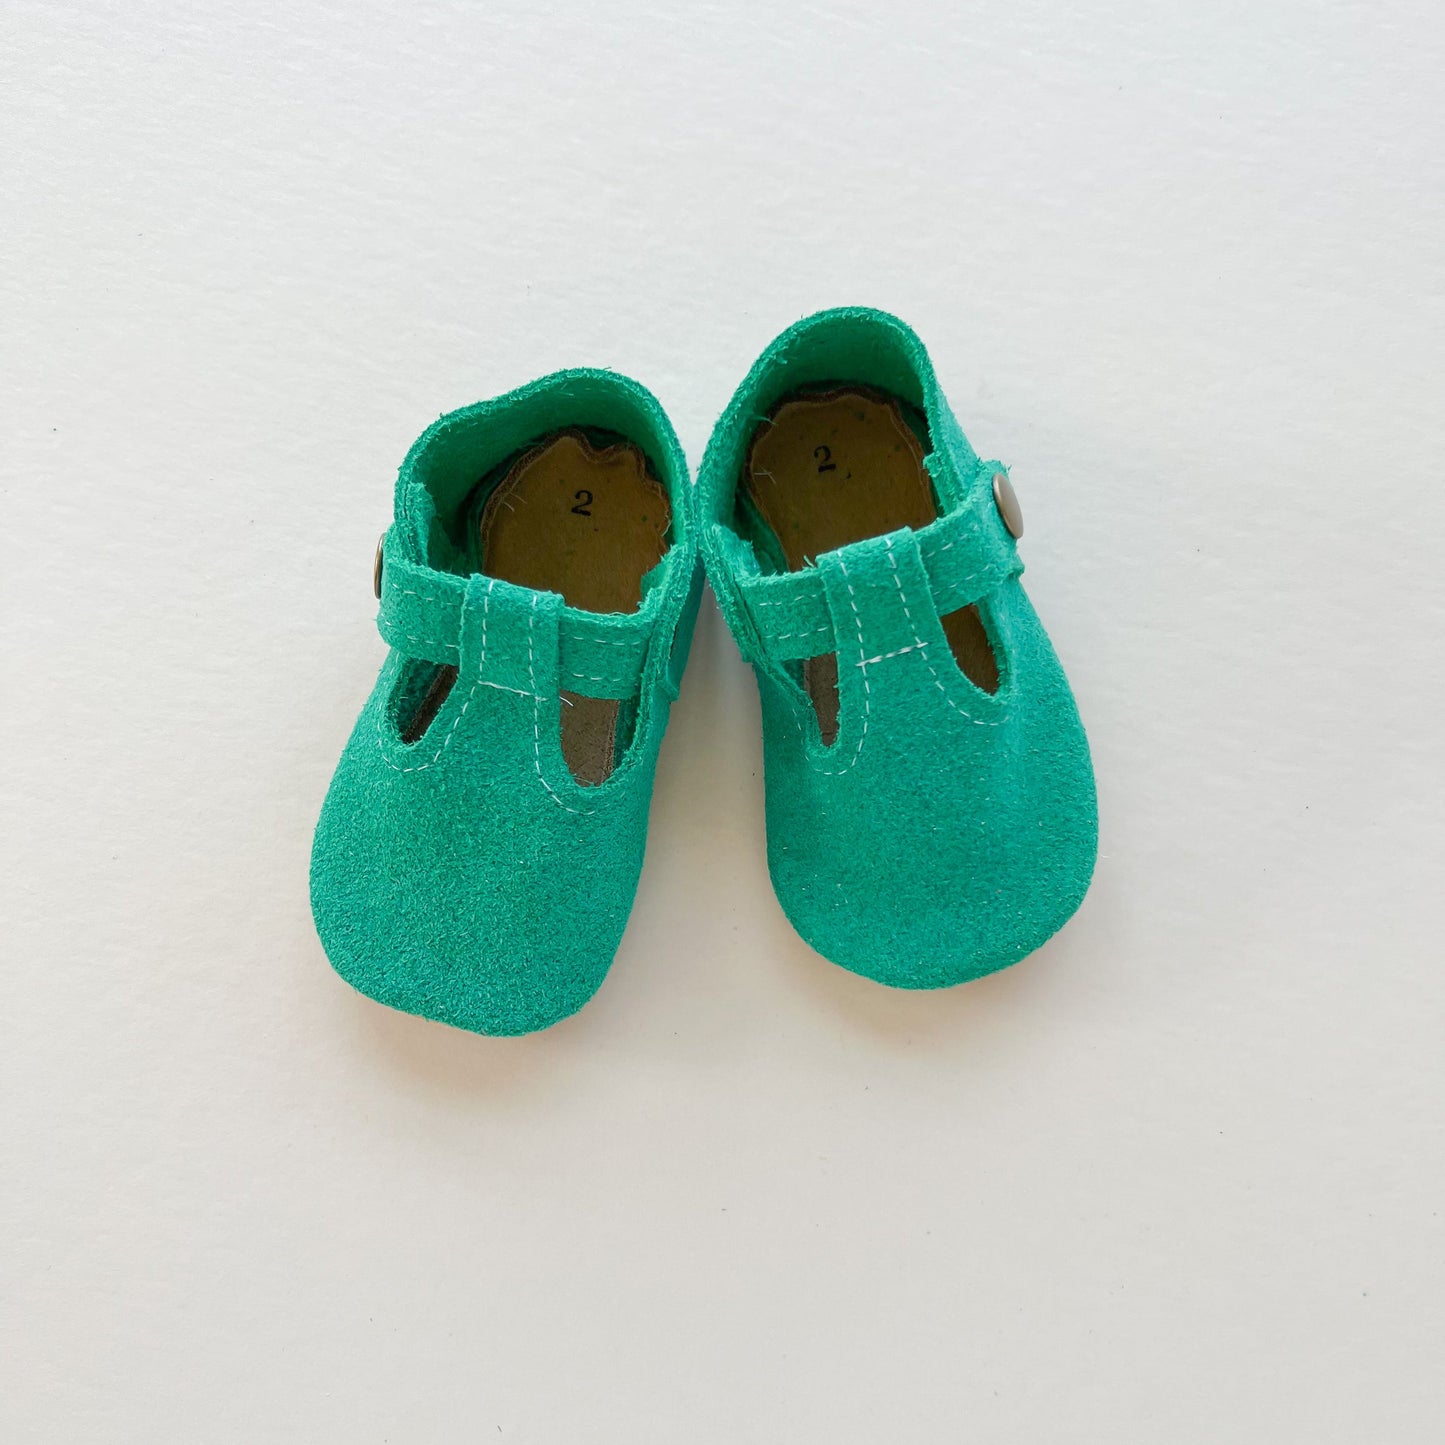 RTS - Emerald Suede Tstraps (Size 2/Suede Sole)